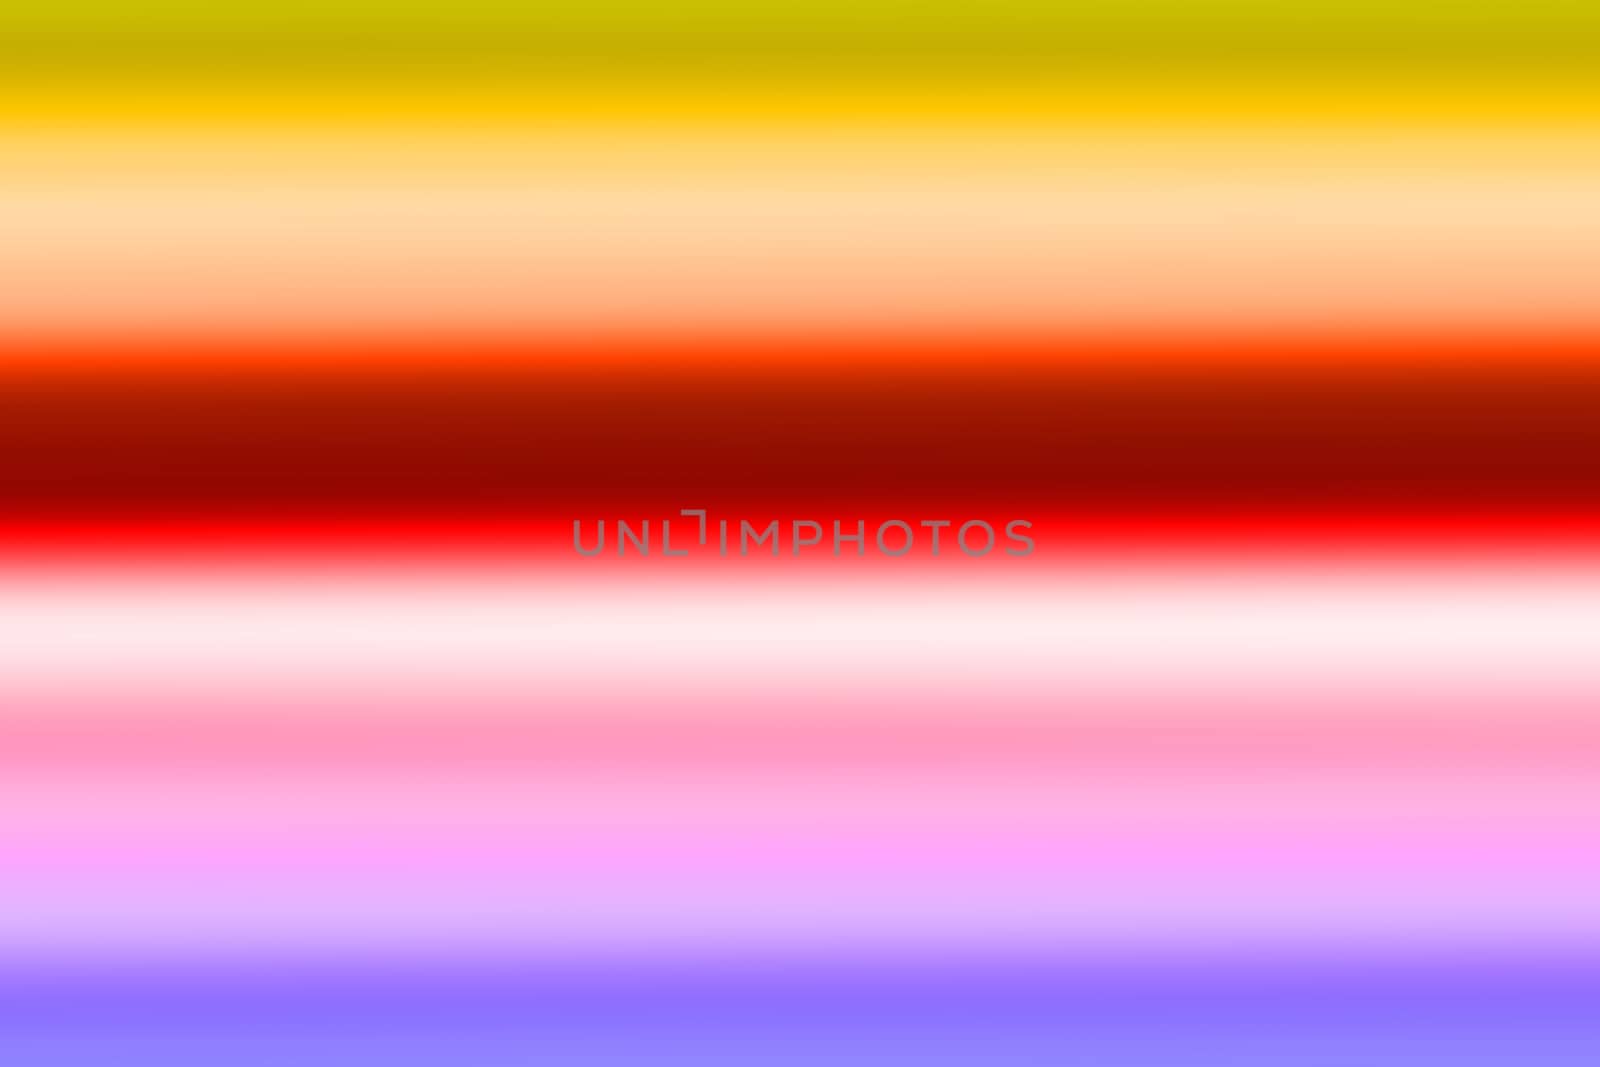 bright rainbow abstract colorful horizontal background, multi colors mixed gradient background